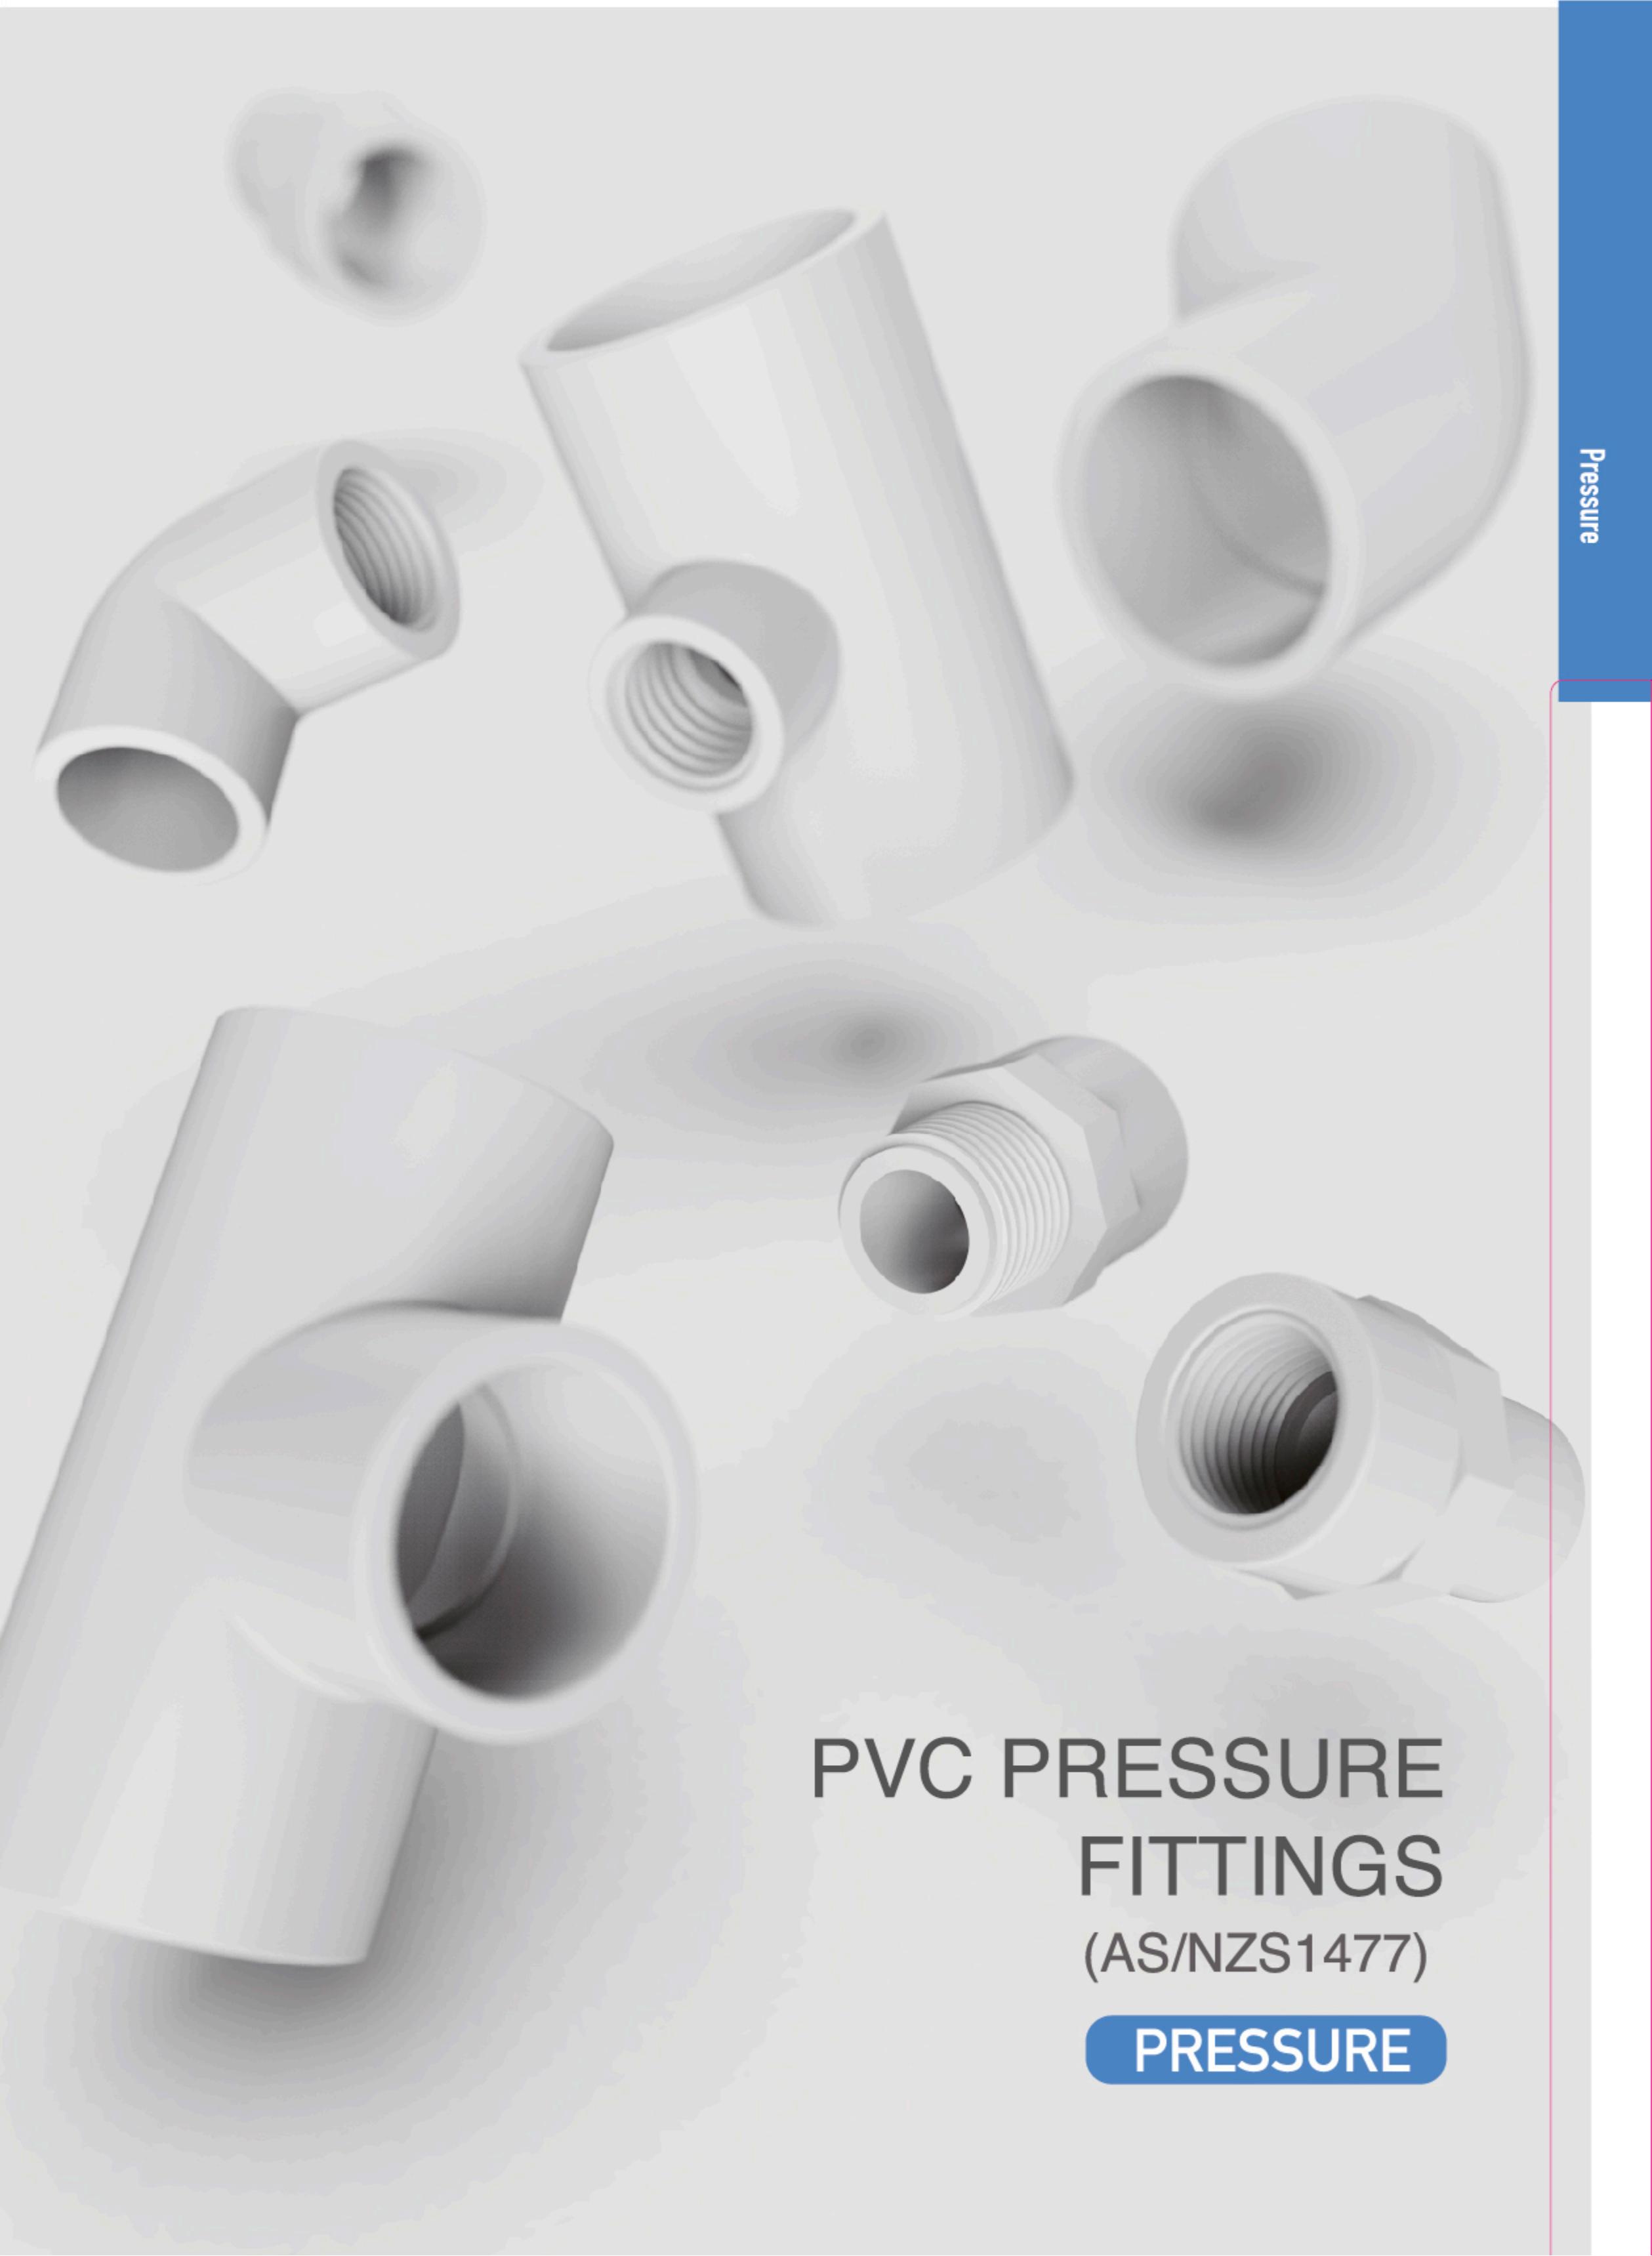 PVC PRESSURE PIPES AND FITTINGS（AS/NZS 1477）